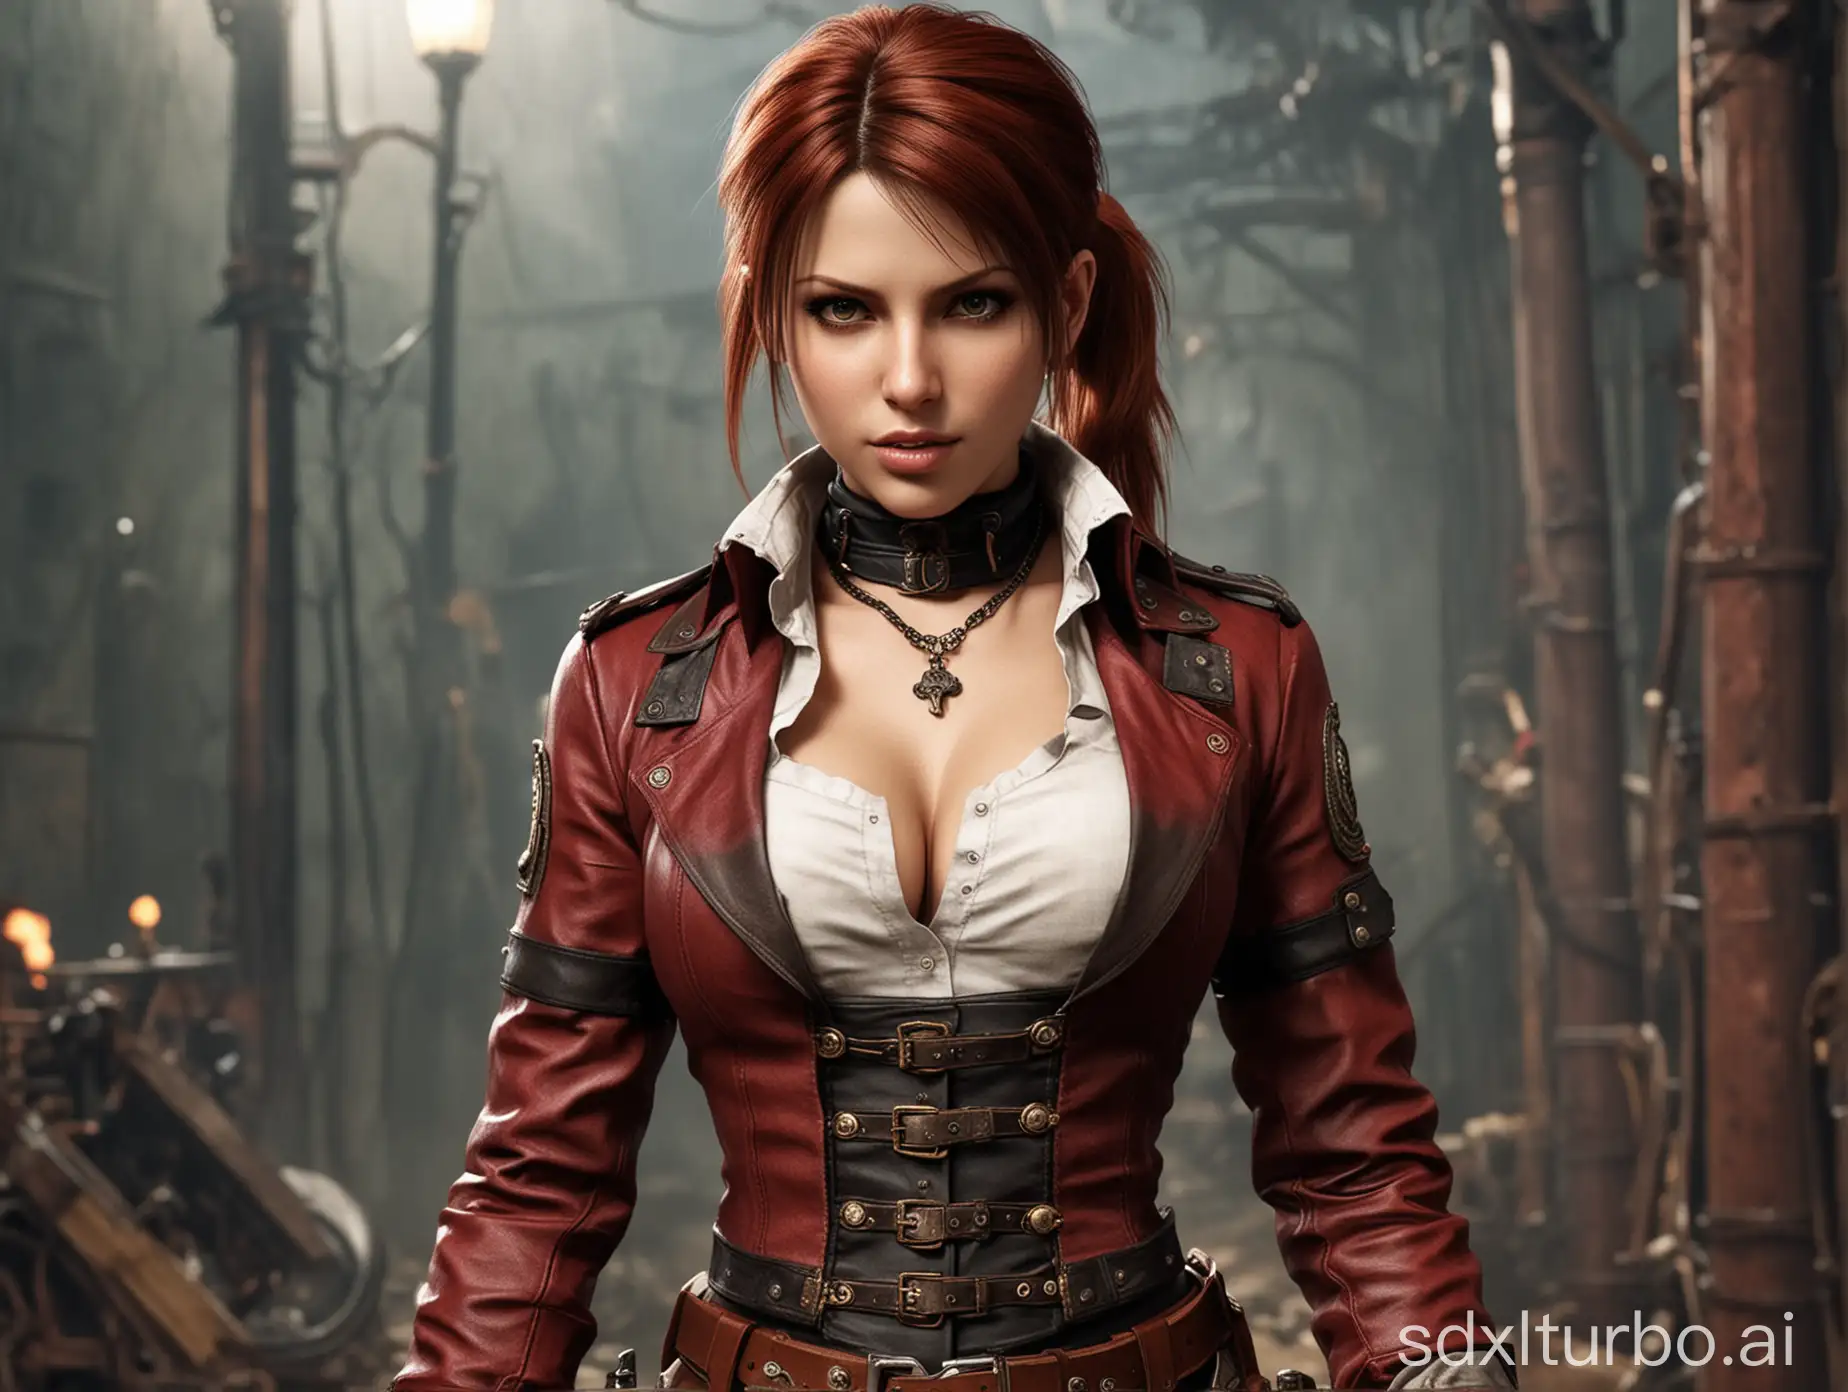 claire redfield in steampunk style in sexy clothing